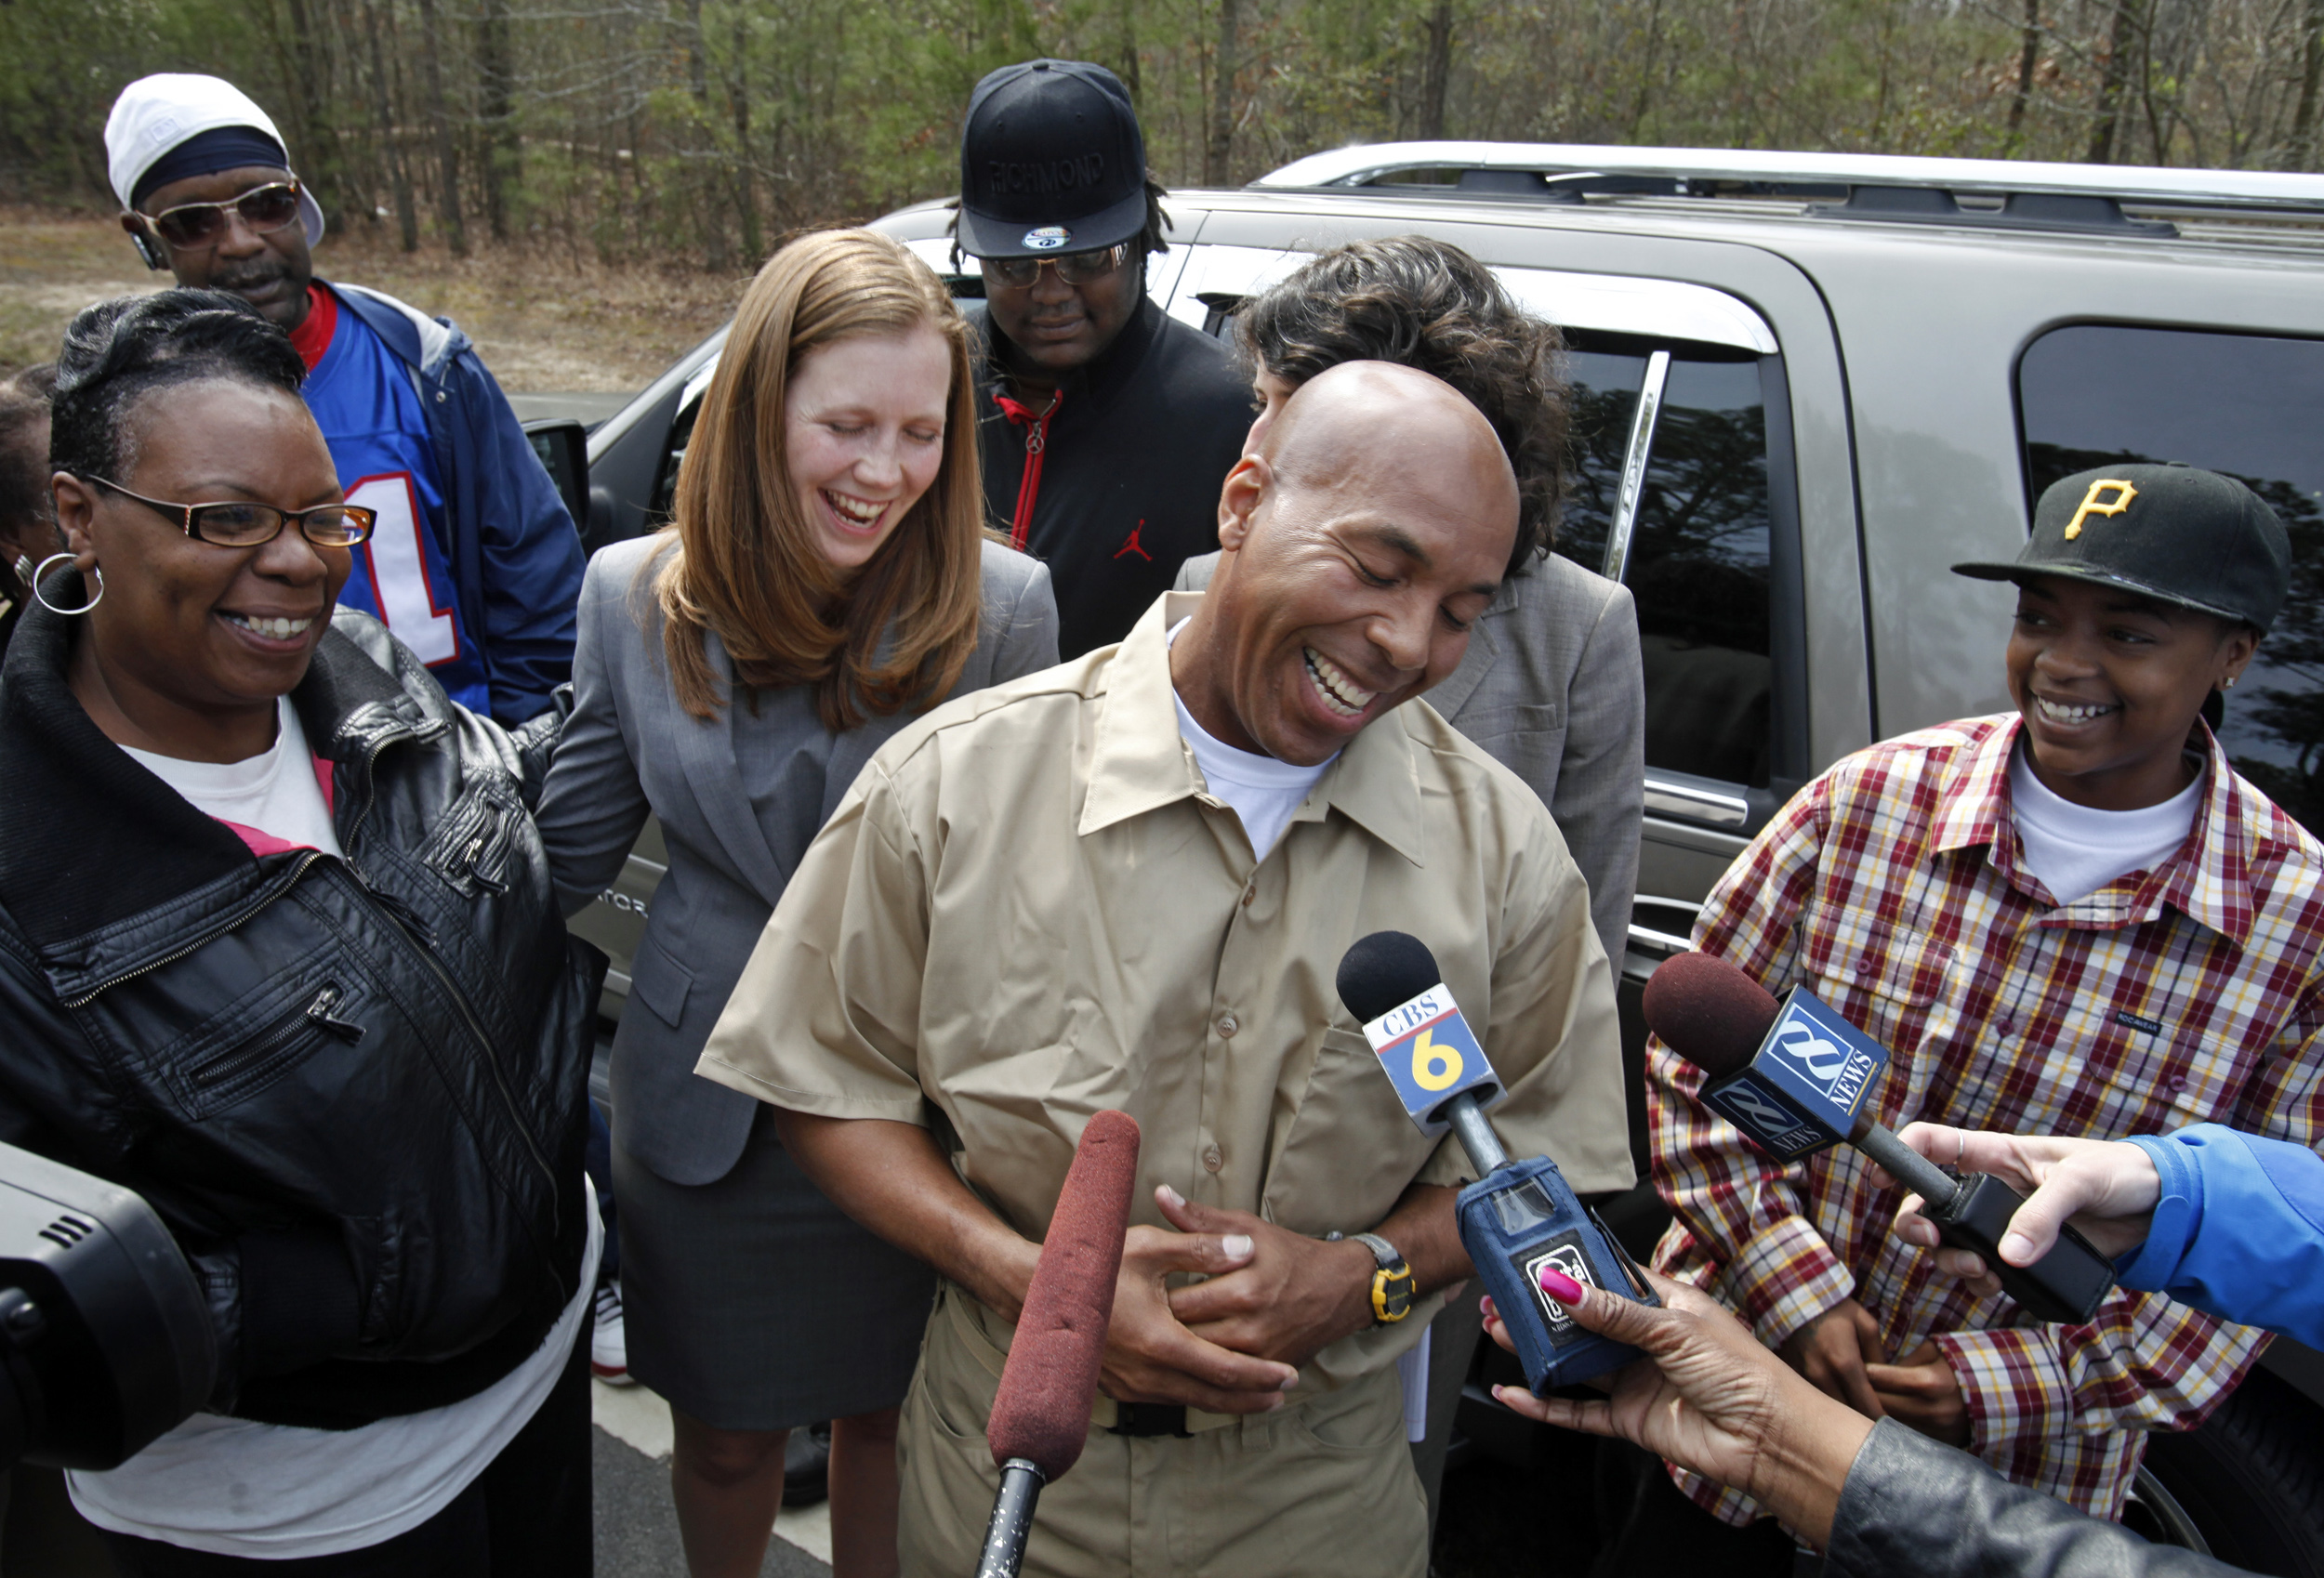 Thomas Haynesworth answers questions from the media after he was released from the Greensville Correctional Center in Jarratt, Va., on March 21, 2011.